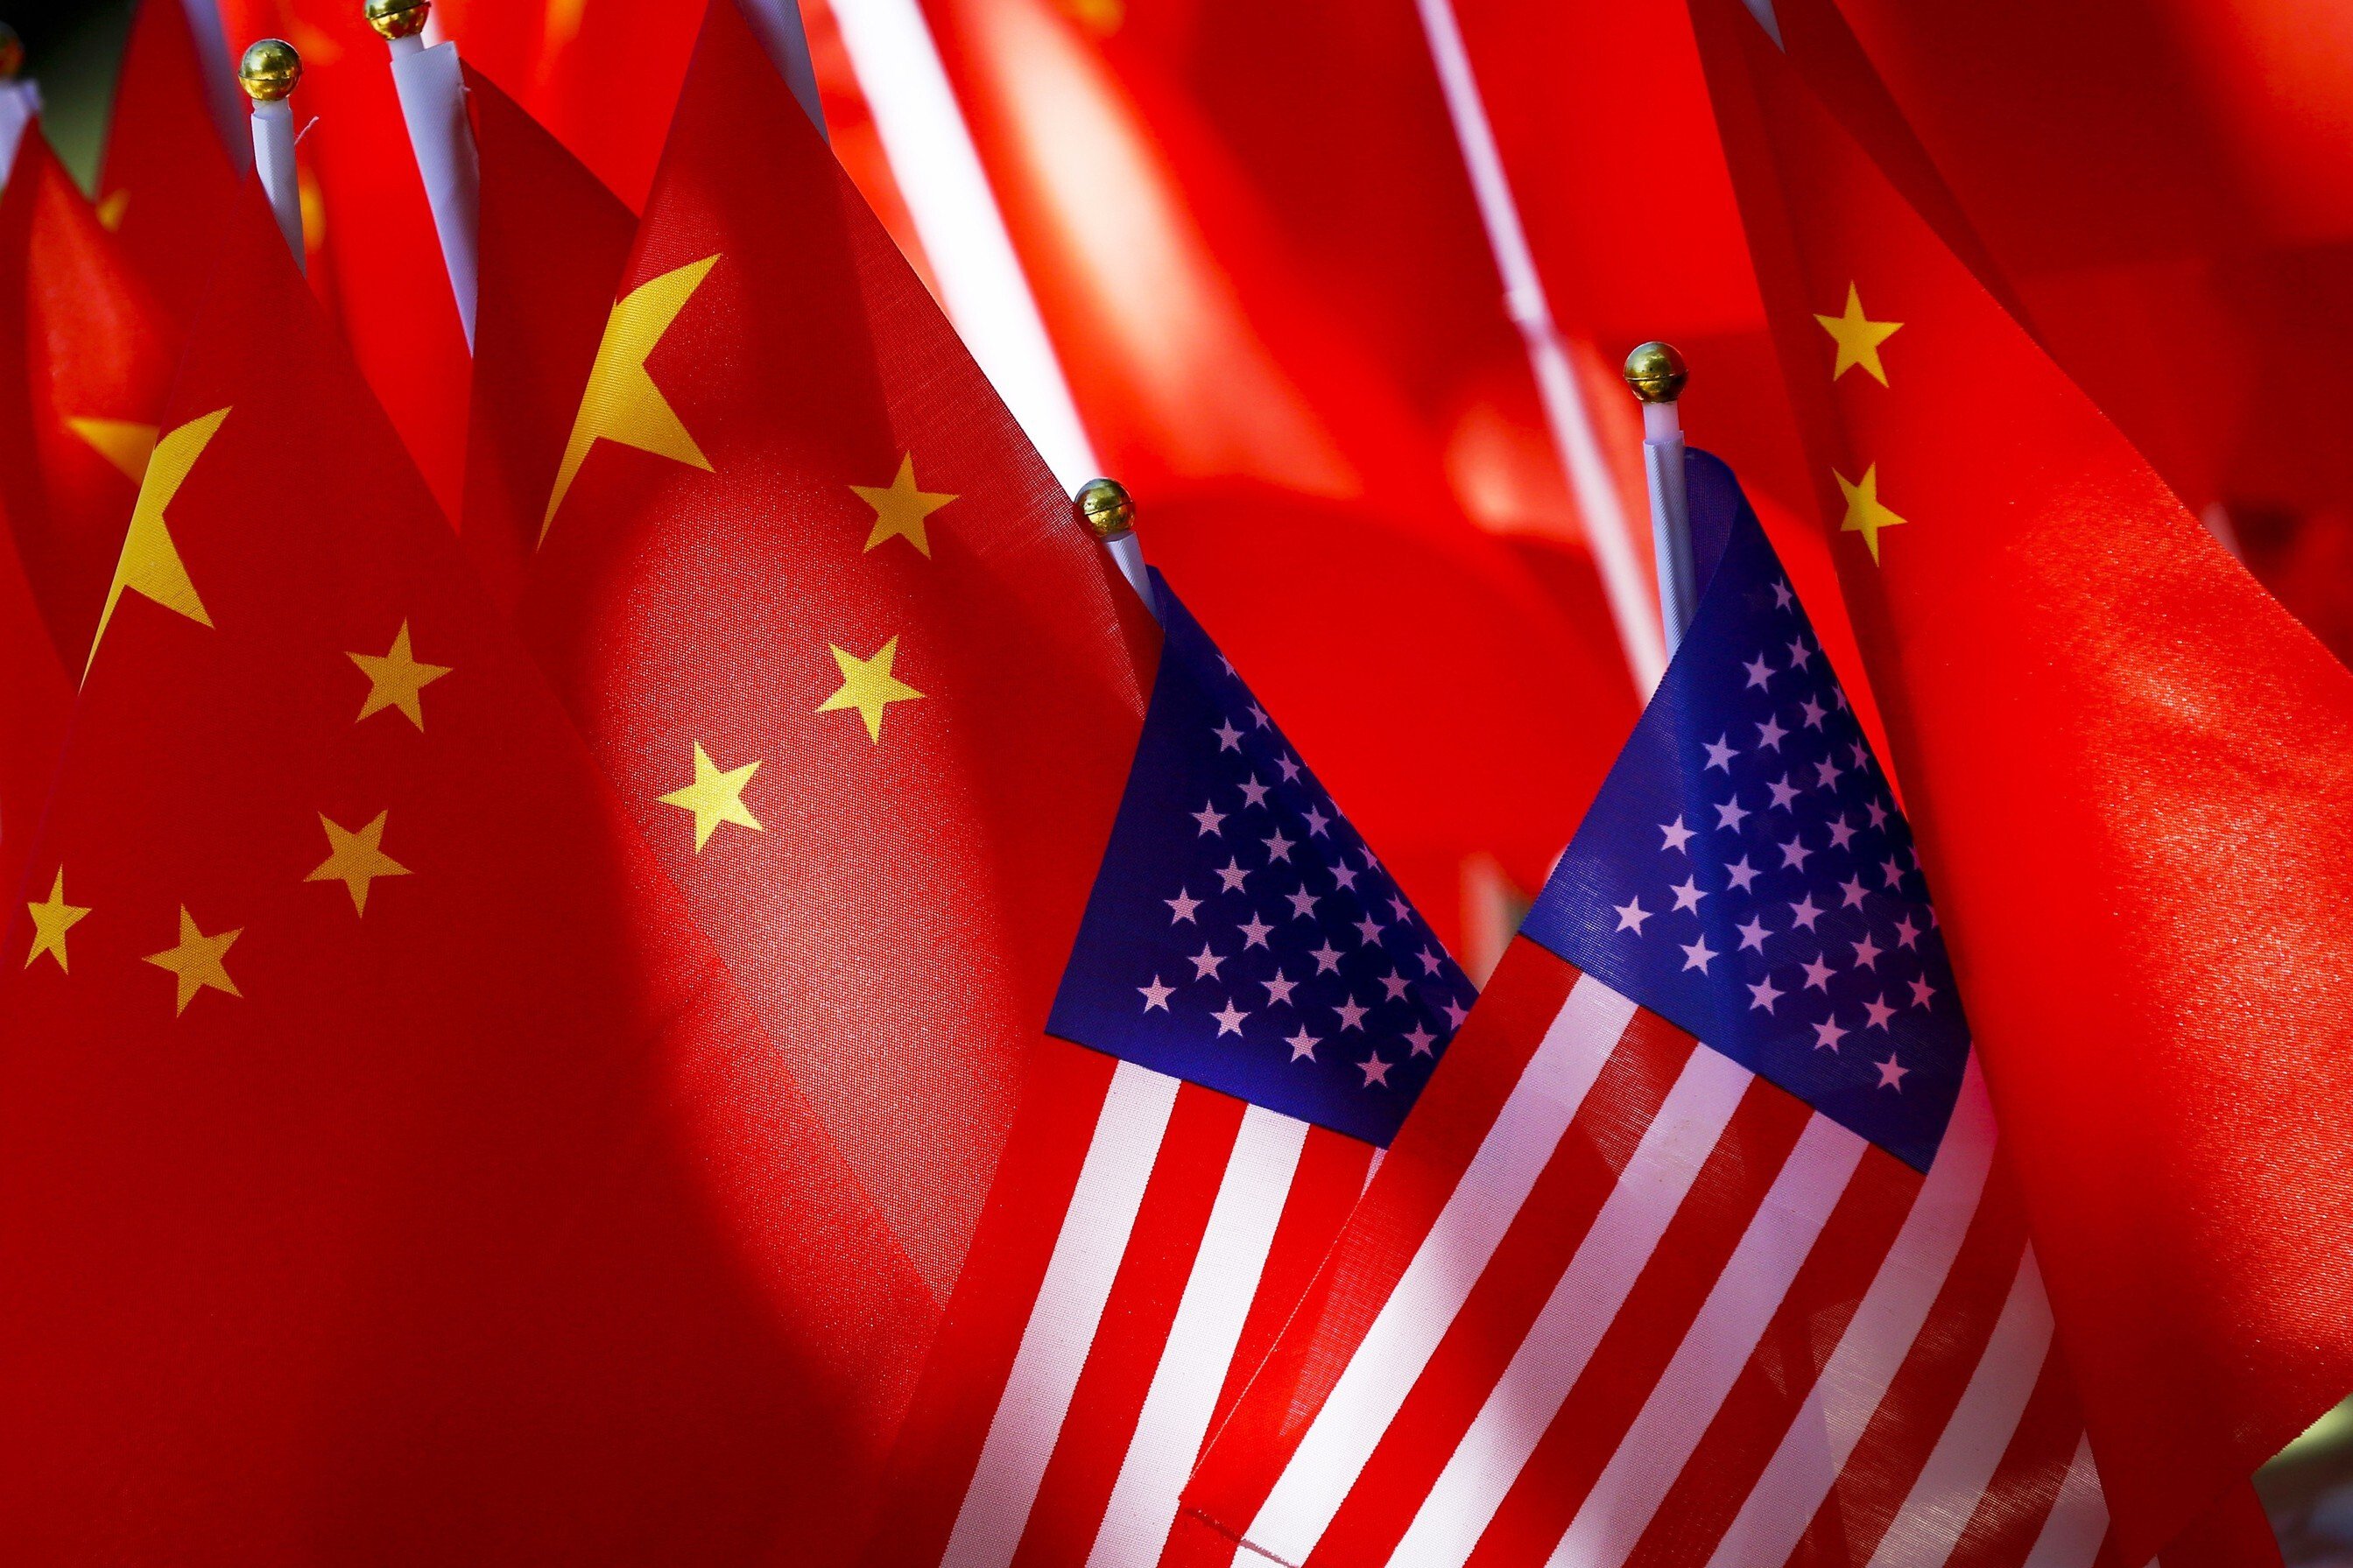 American flags are displayed together with Chinese flags in Beijing in 2018. If China and the United States continue on their current confrontational trajectory, other actors such as Asean might need to step in to prevent further global destabilisation. Photo: AP